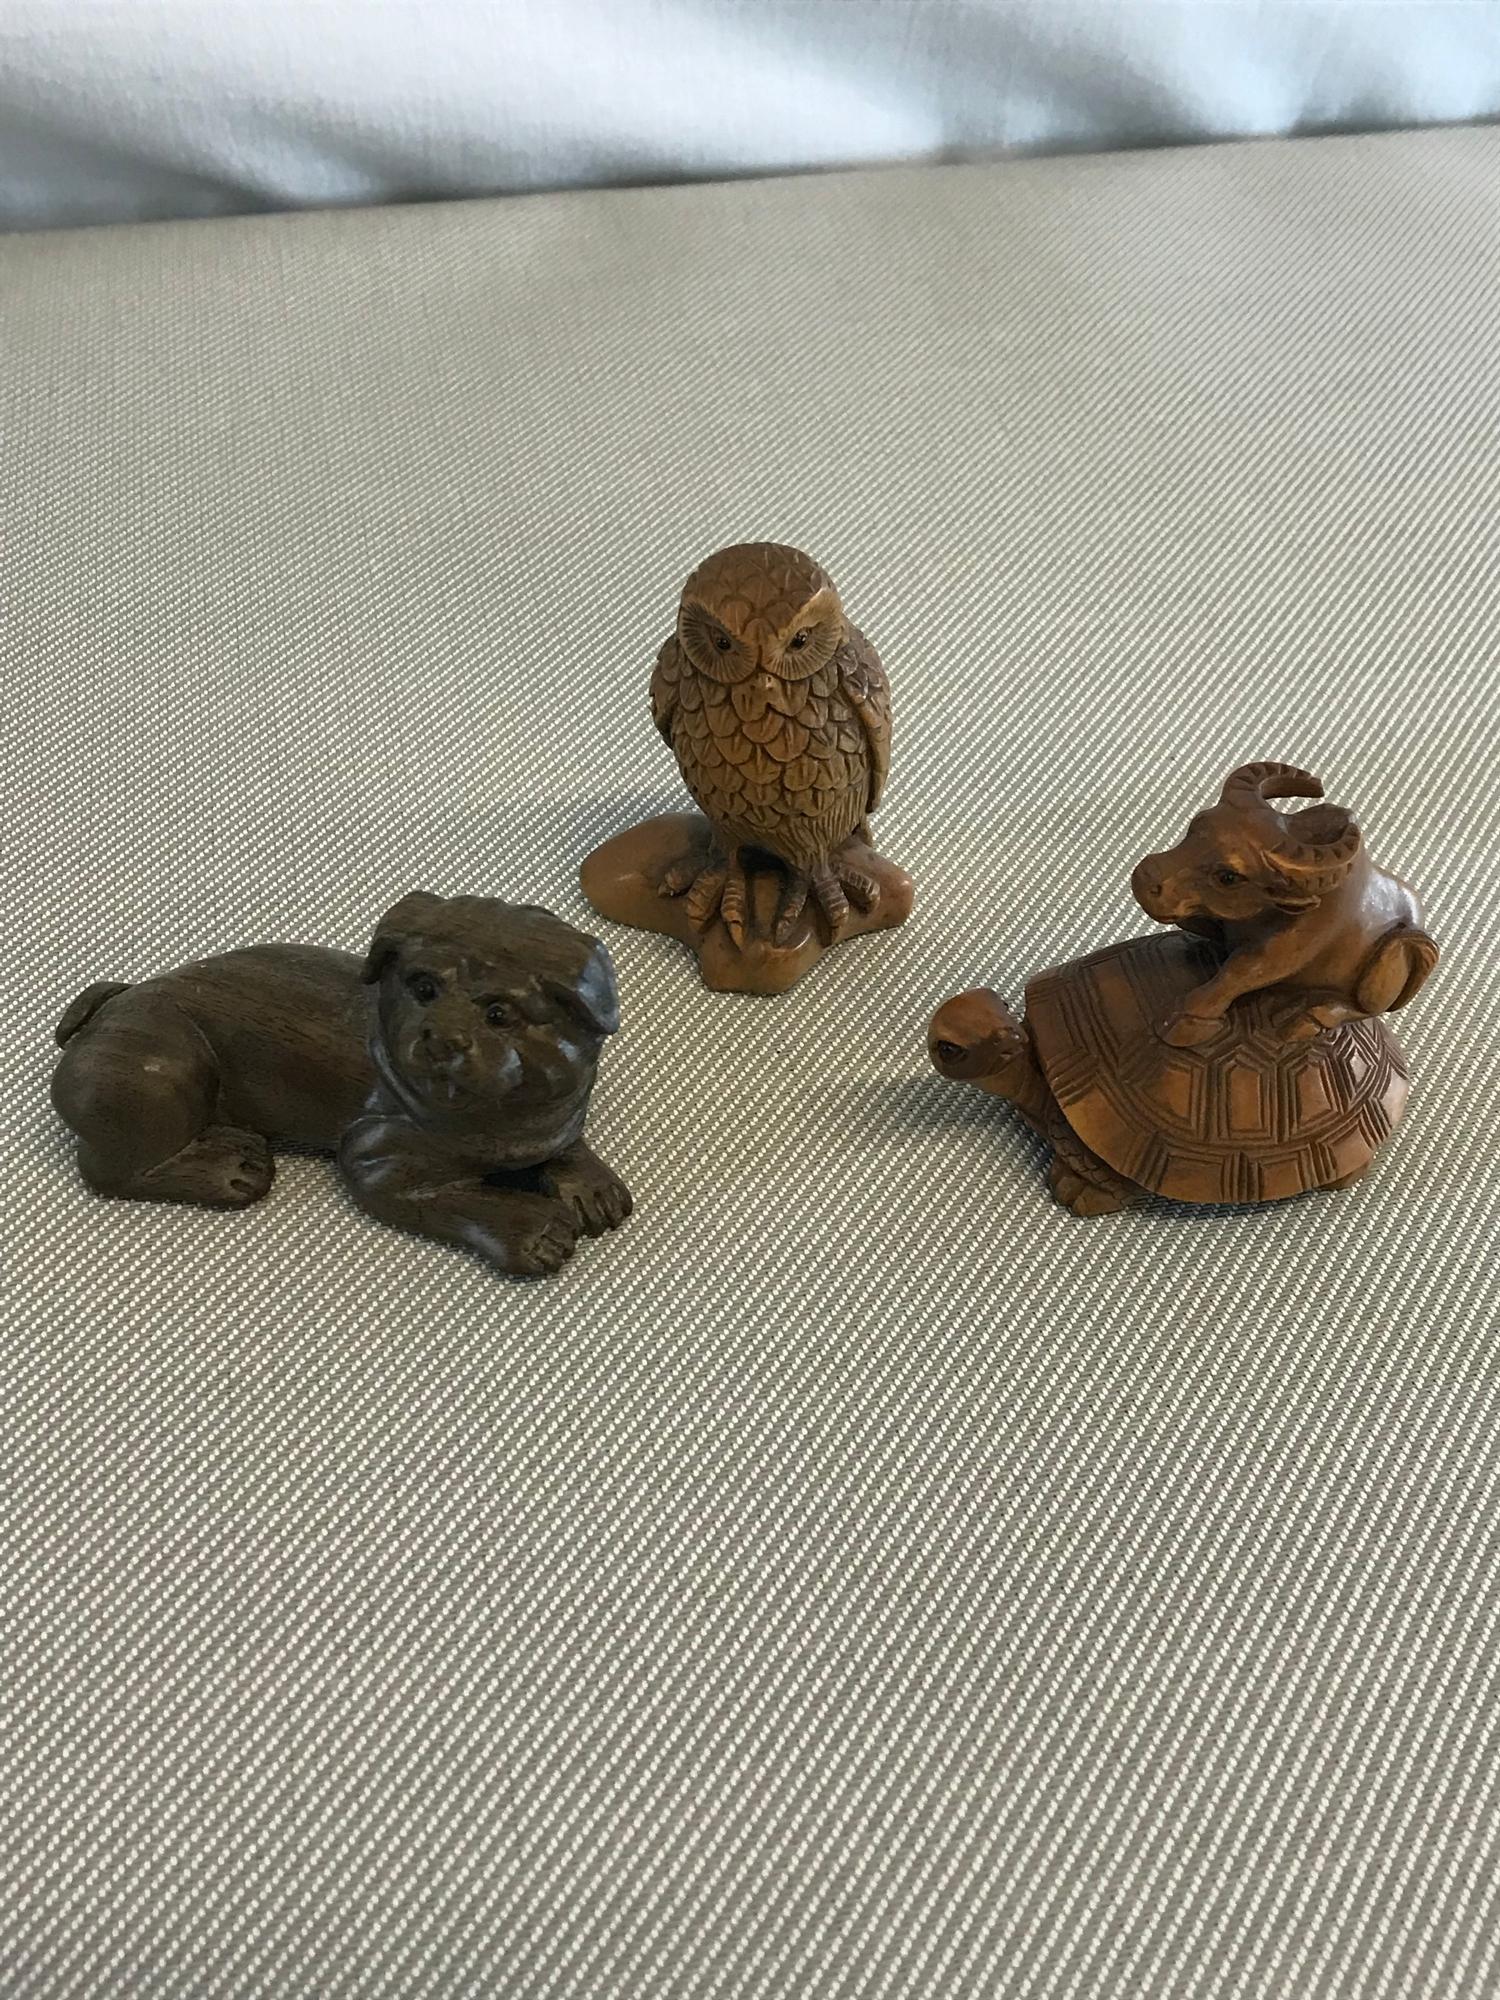 3 Carved wooden netsuke animal figures signed to the bases